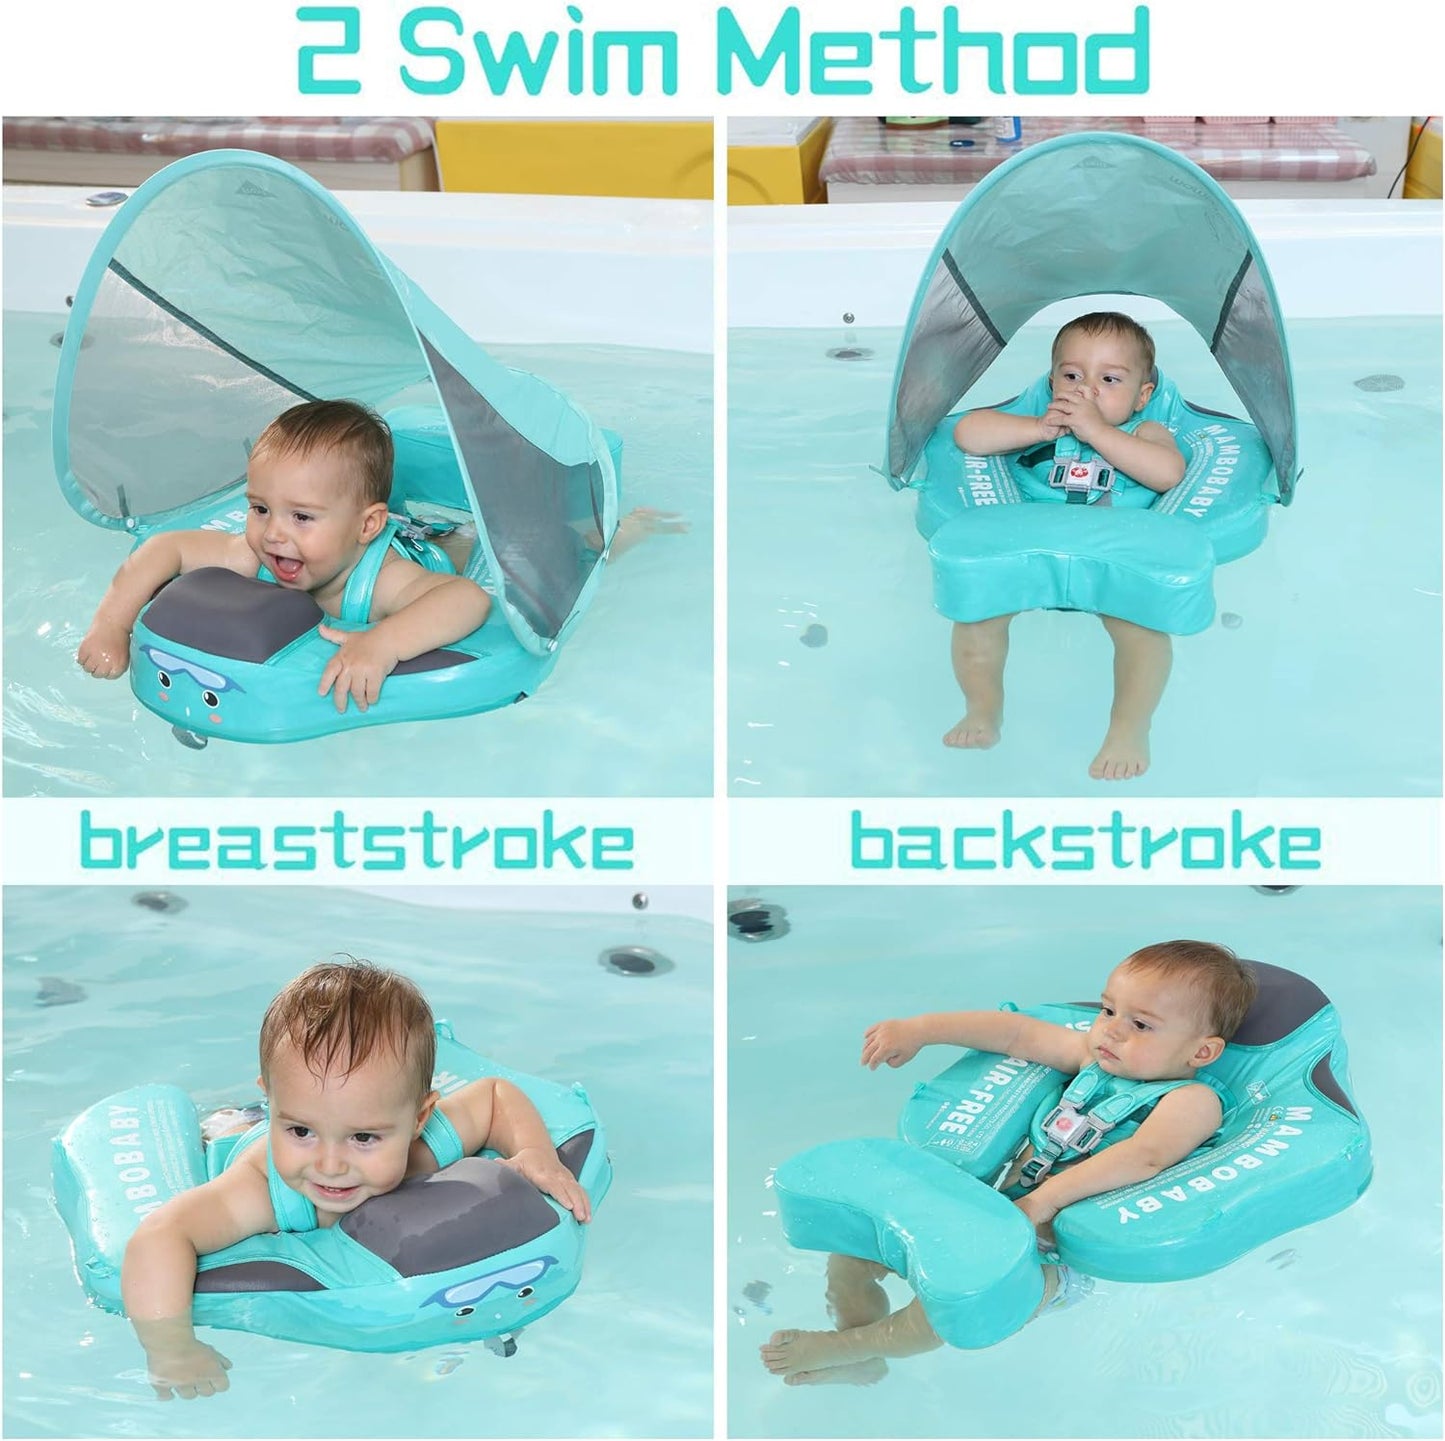 Mambobaby Non-Inflatable Solid Baby Float with Canopy Deluxe Edition